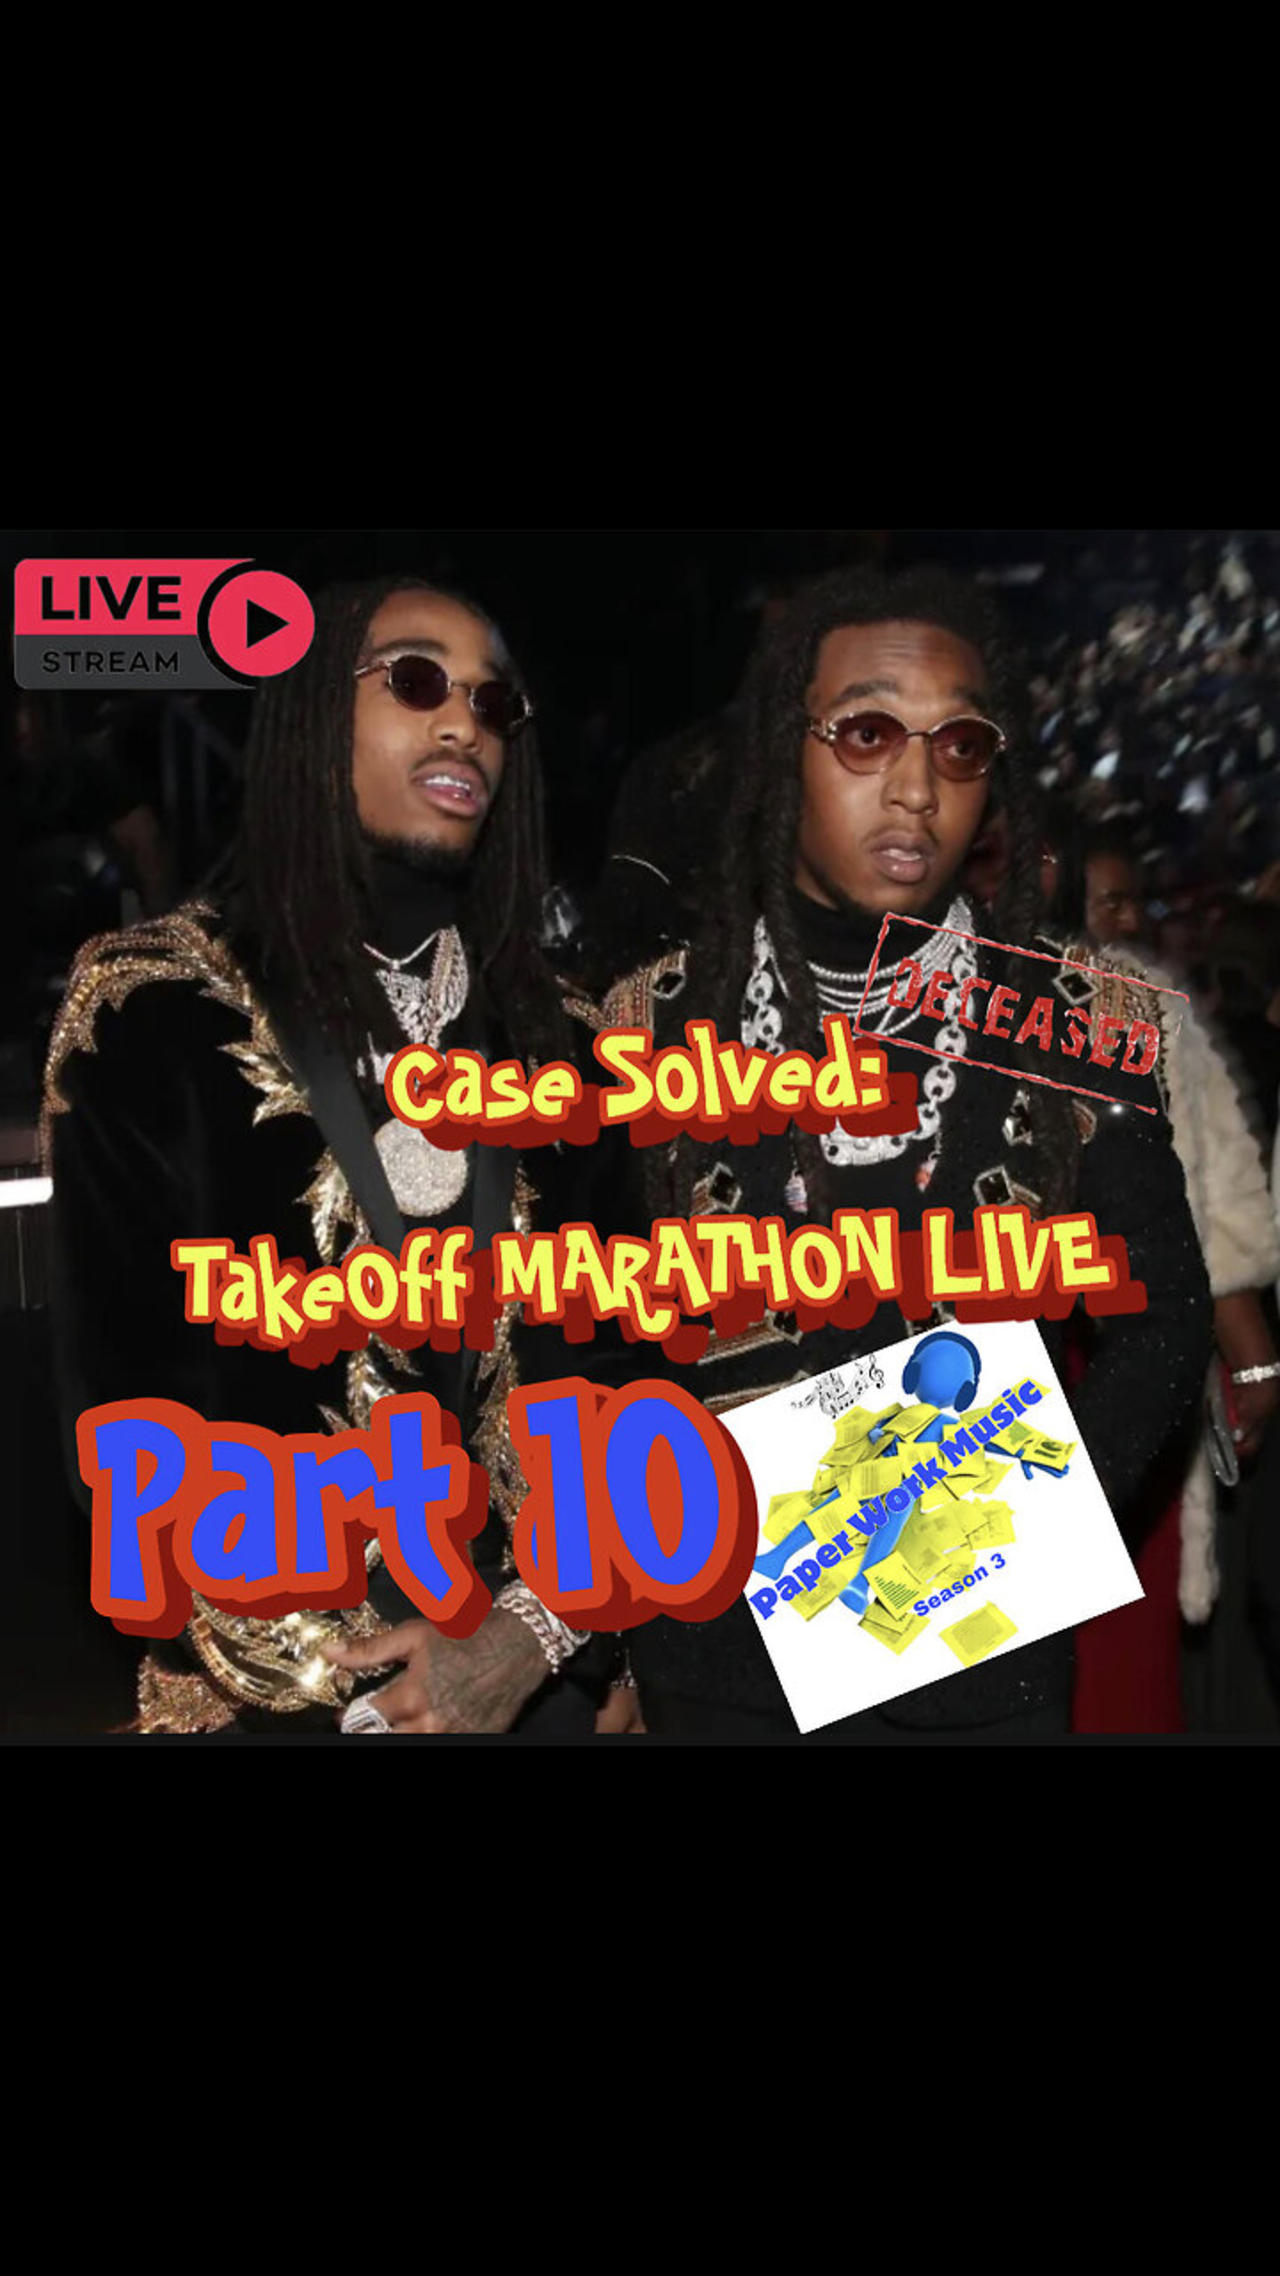 LIVE: Part 10 CASE SOLVED by Paper Work Party: TakeOff "FLASHBACK" MARATHON